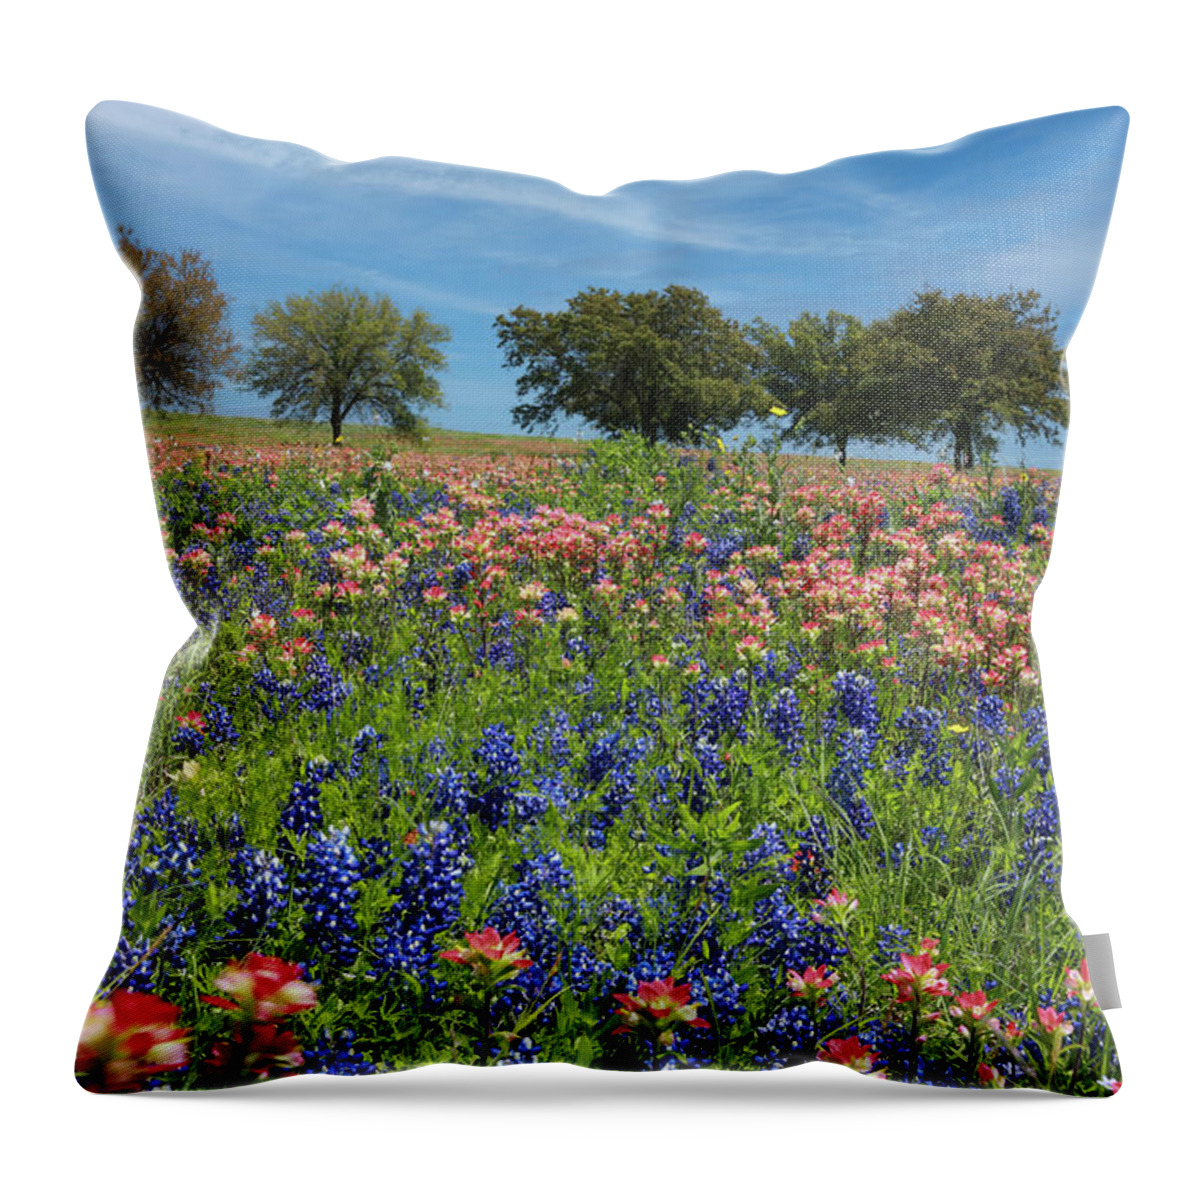 Flower Throw Pillow featuring the photograph Paintbrushes and Bluebonnets by Steve Templeton